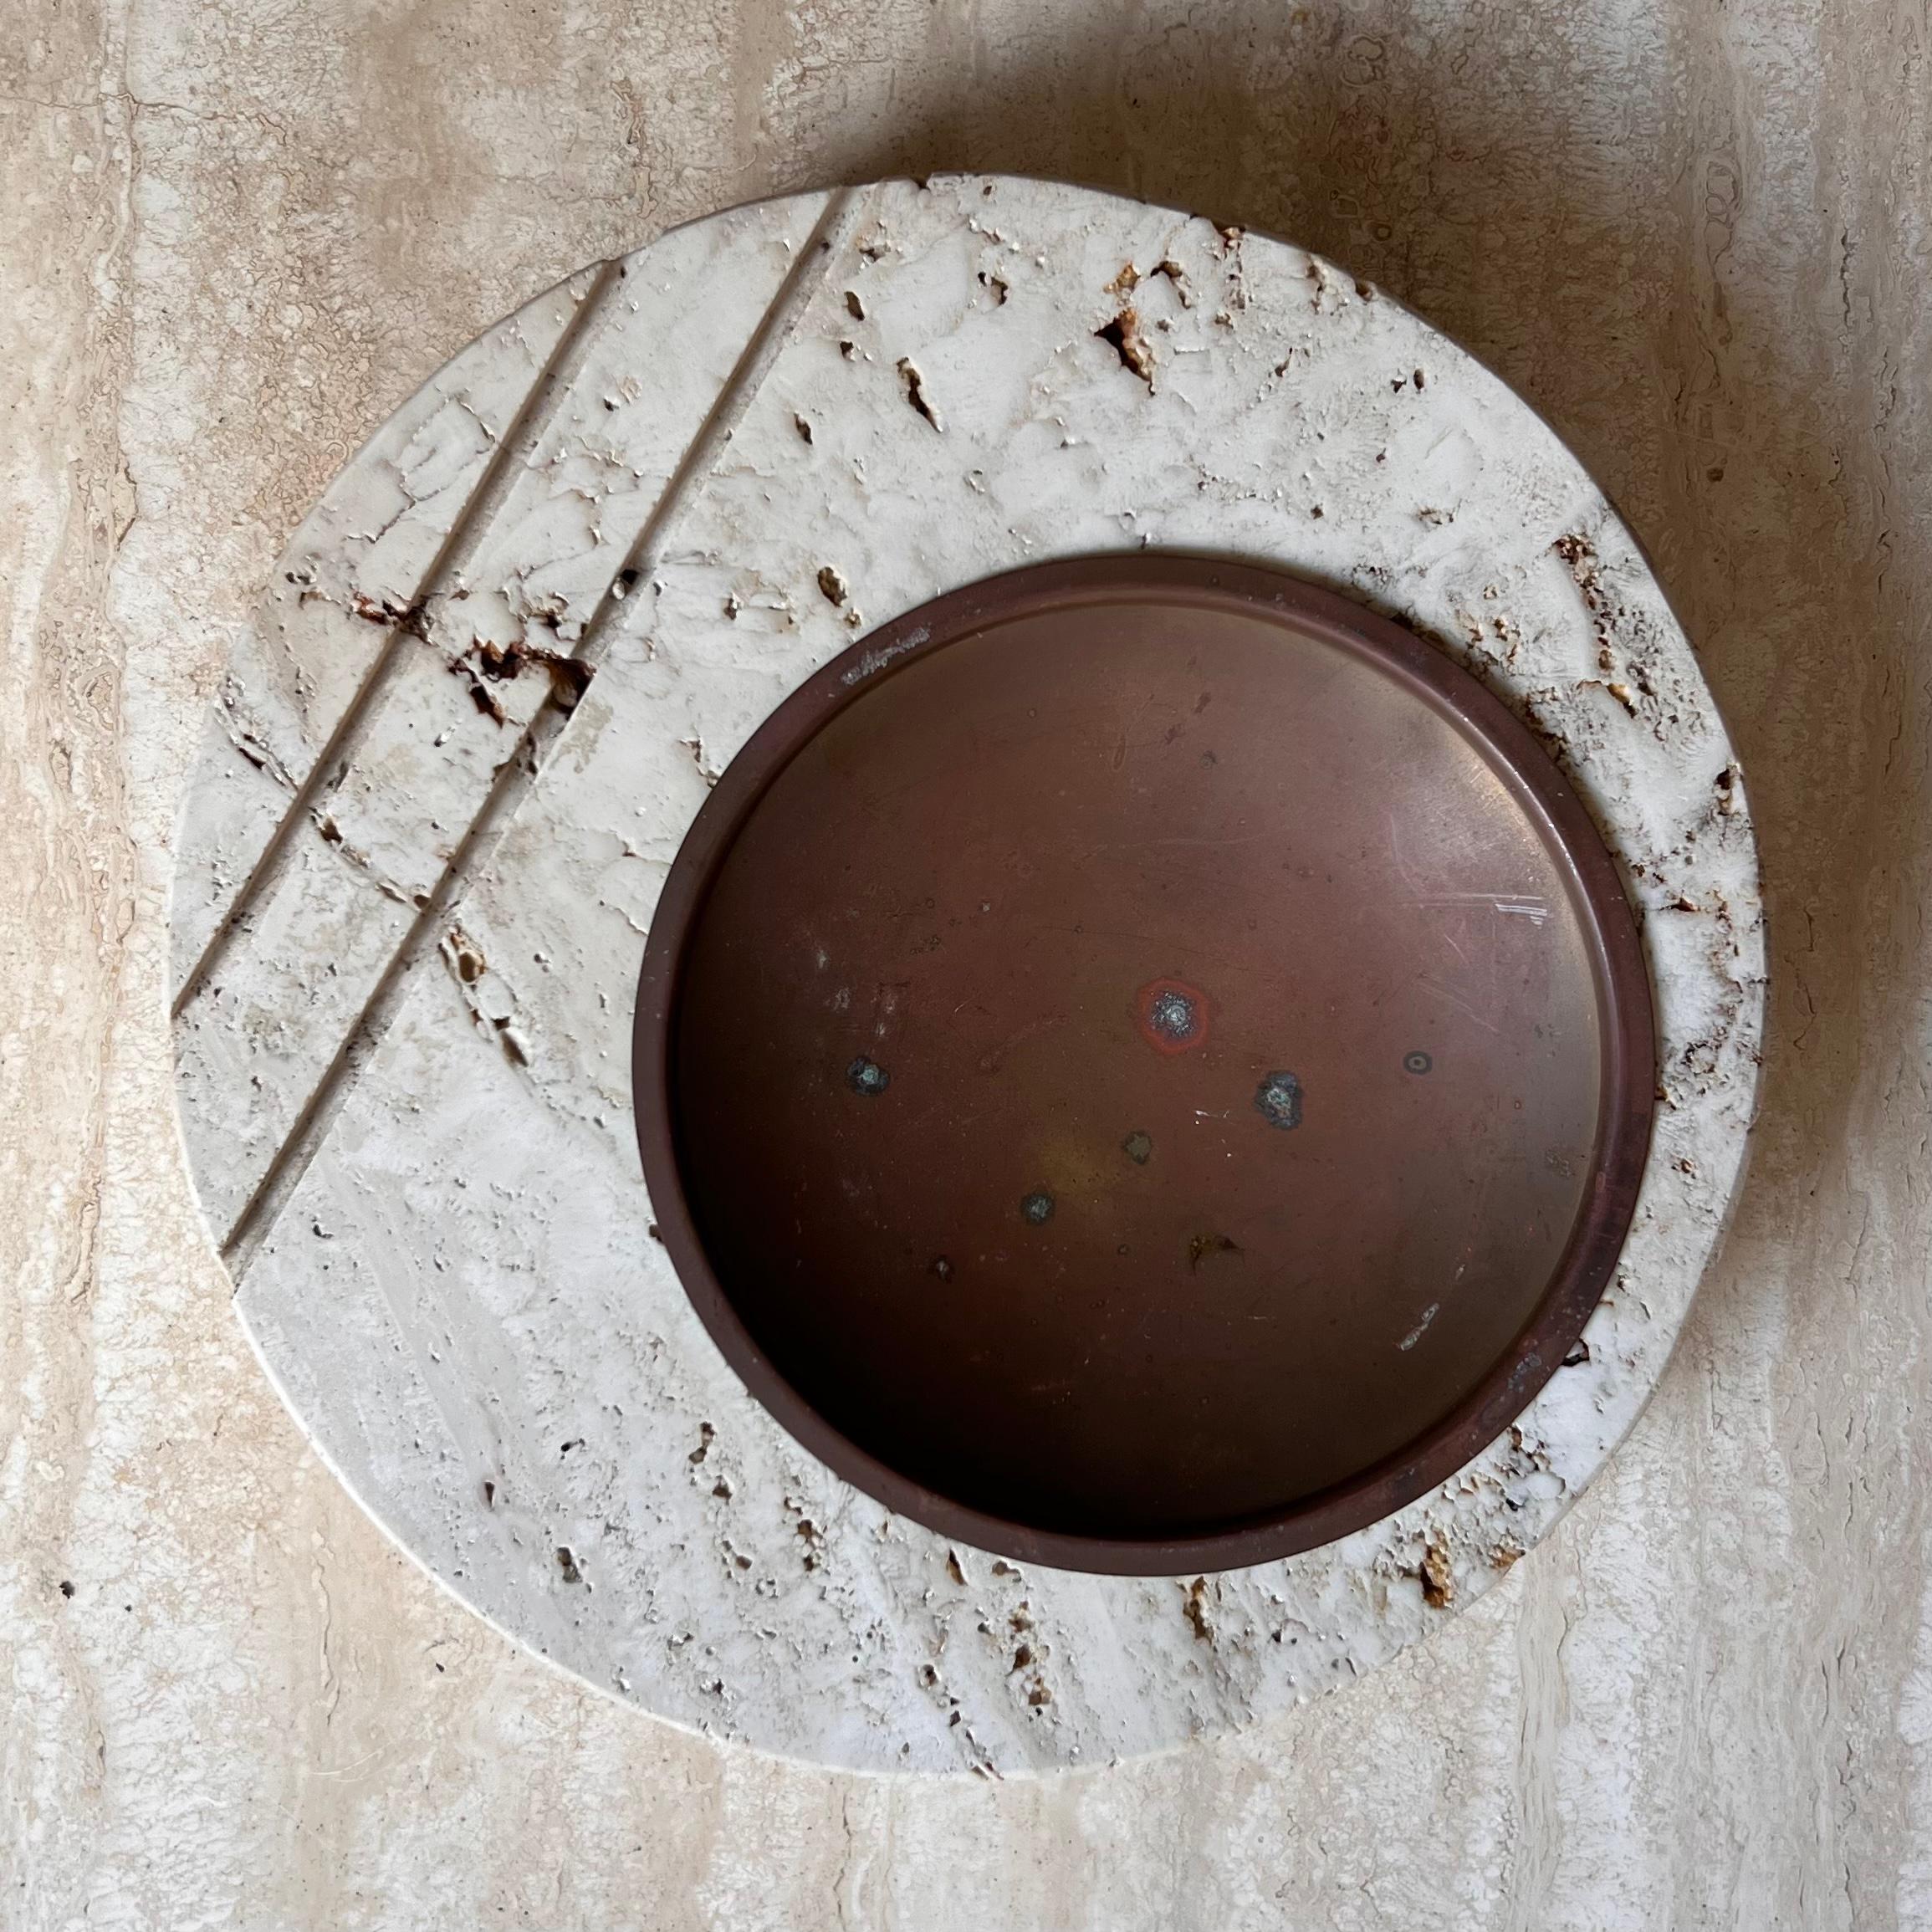 A large and heavy stone ashtray by postmodern Italian designed Fratelli Mannelli, circa 1970. Hand-carved out of raw travertine and featuring a sienna-toned metal inlay, as well as the iconic Mannelli lines which are seminal to the postmodern